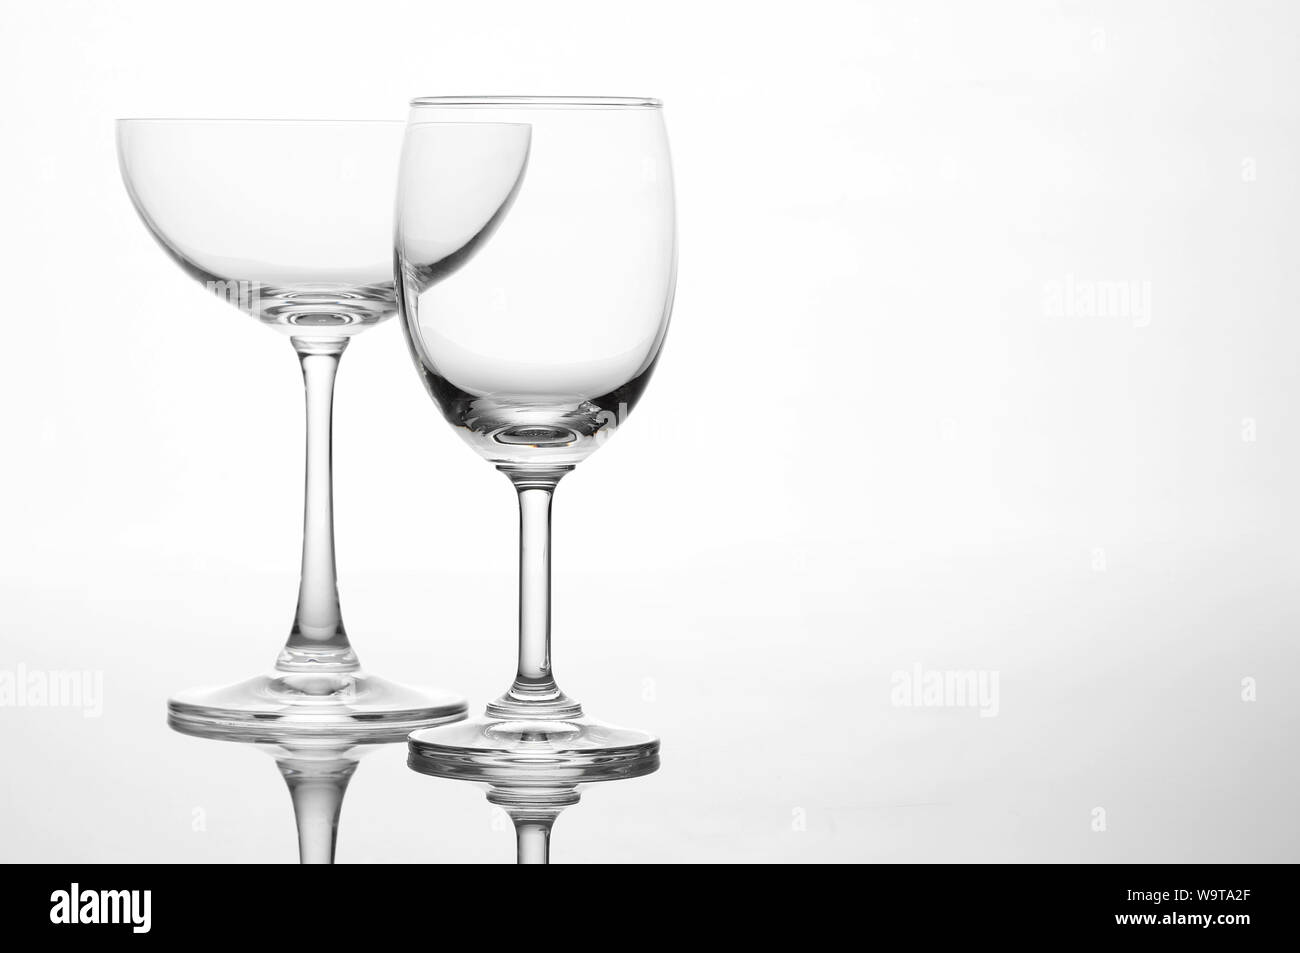 Empty wine glasses and cocktail glass art composition creative S Stock Photo